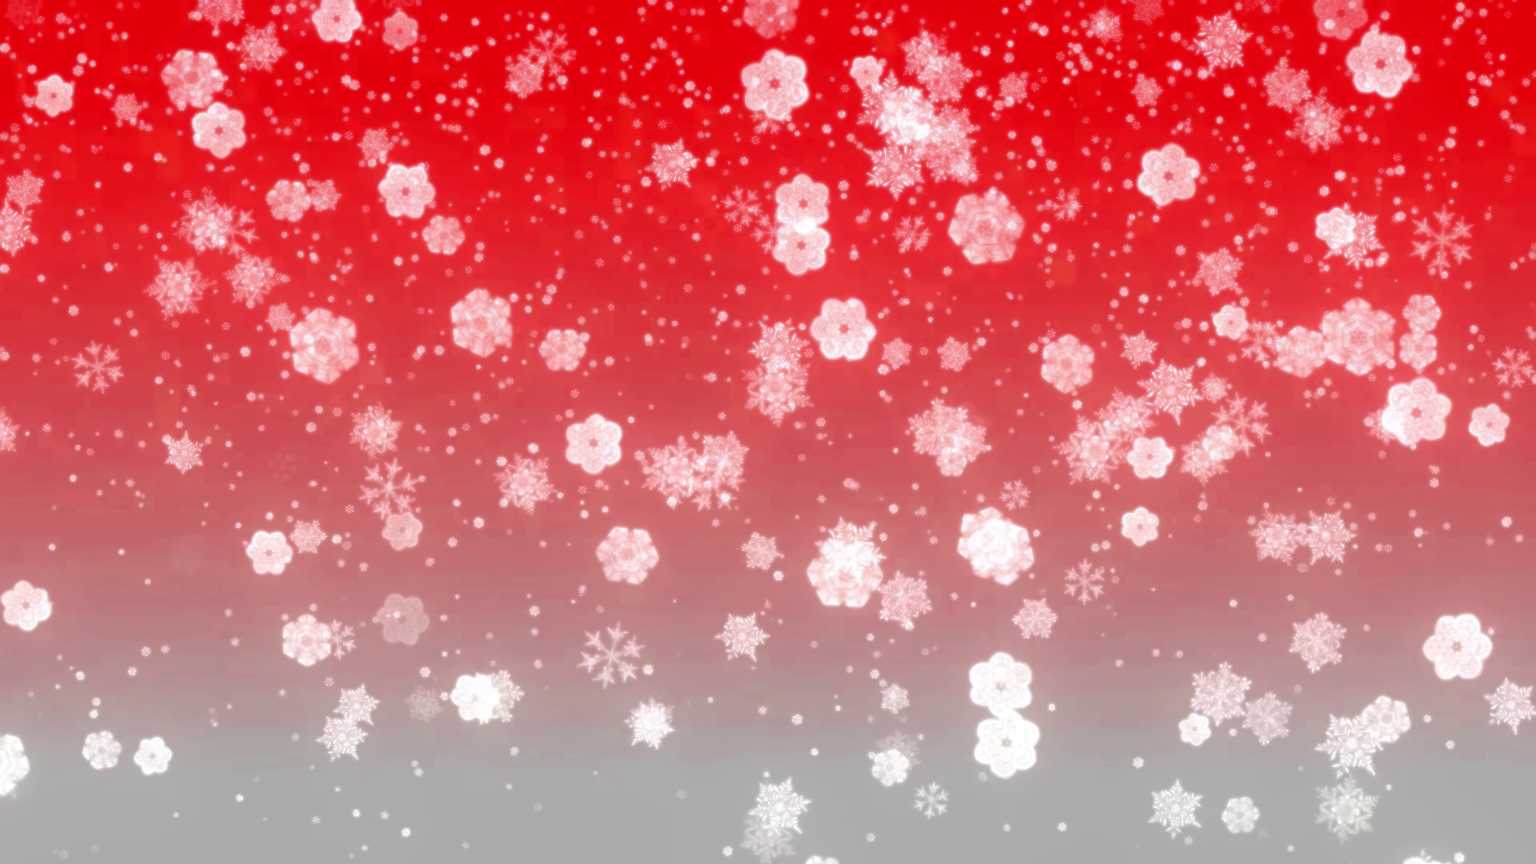 4K Christmas Themed Snowflakes Motion Background || Free Screensaver